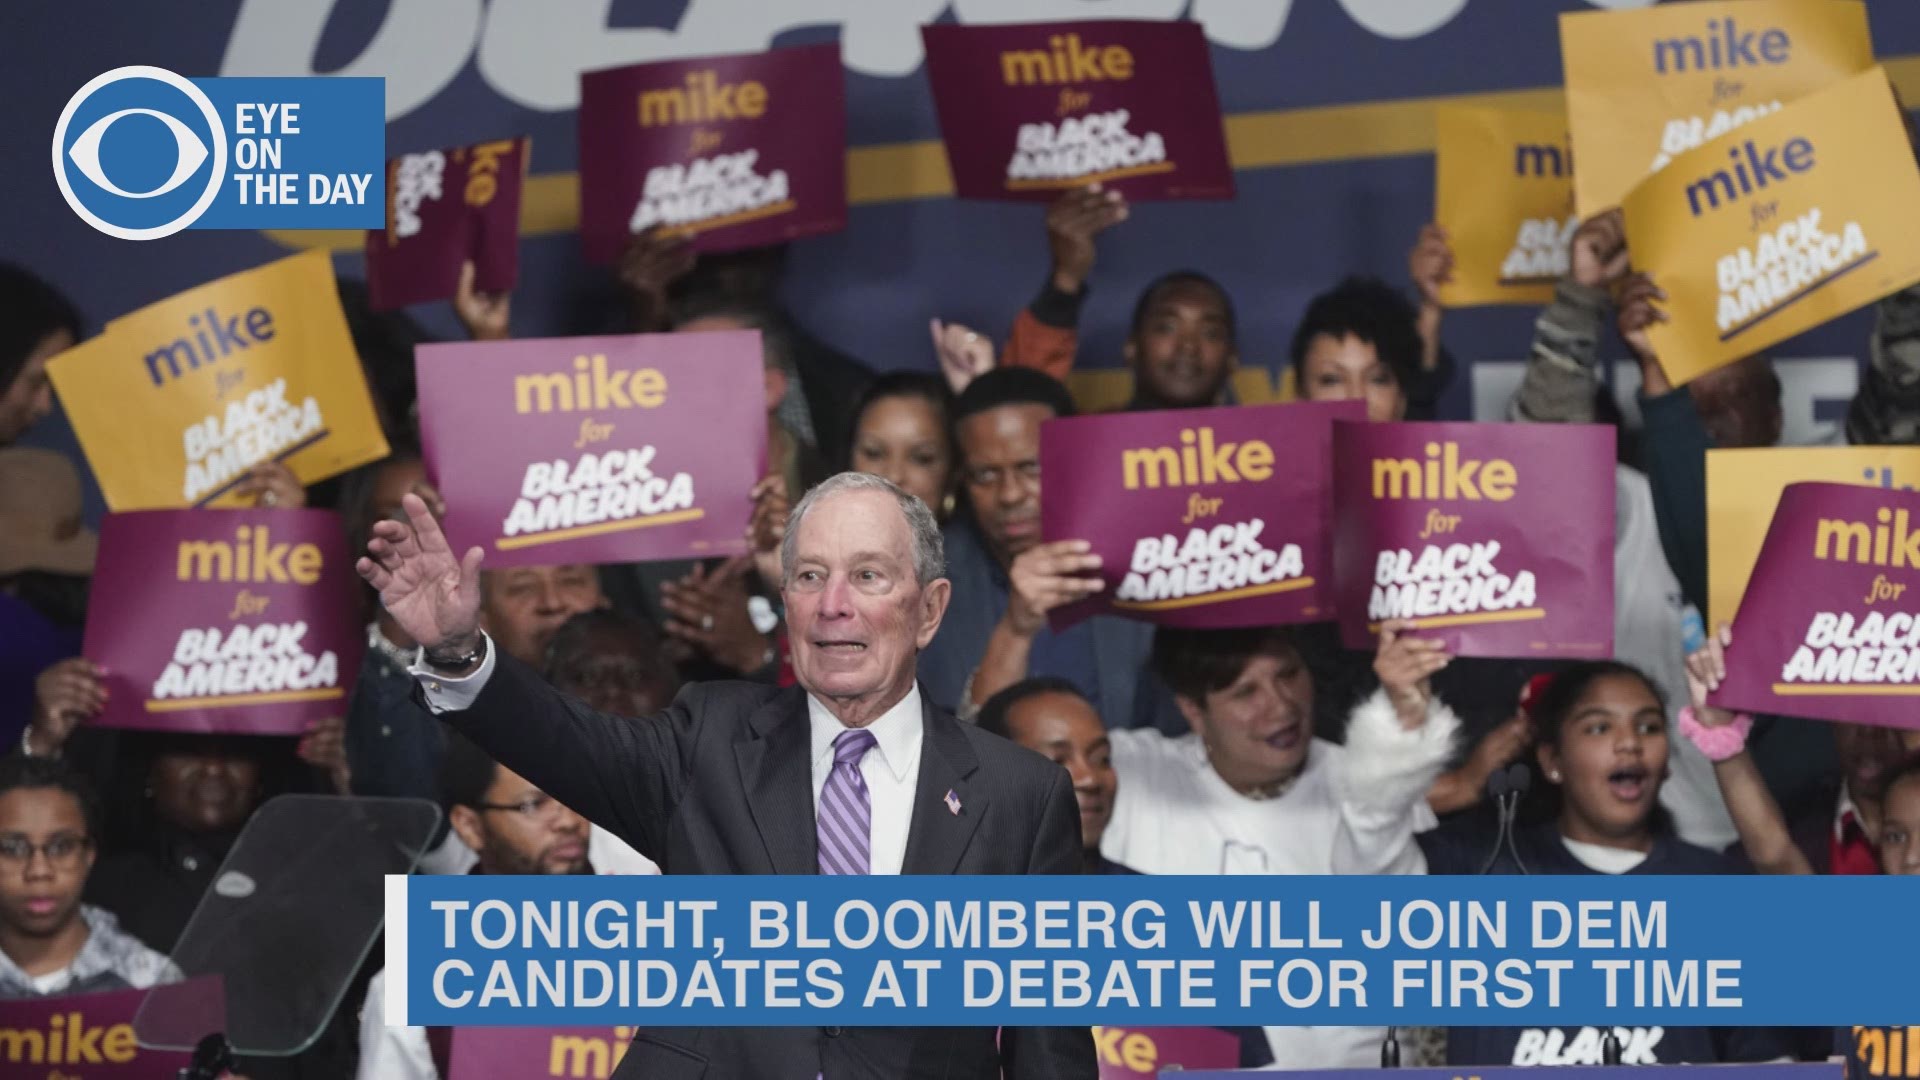 Michael Bloomberg joins Democratic candidates on the debate stage tonight, President Trump grants clemency to almost a dozen people, and a SpaceX trip.